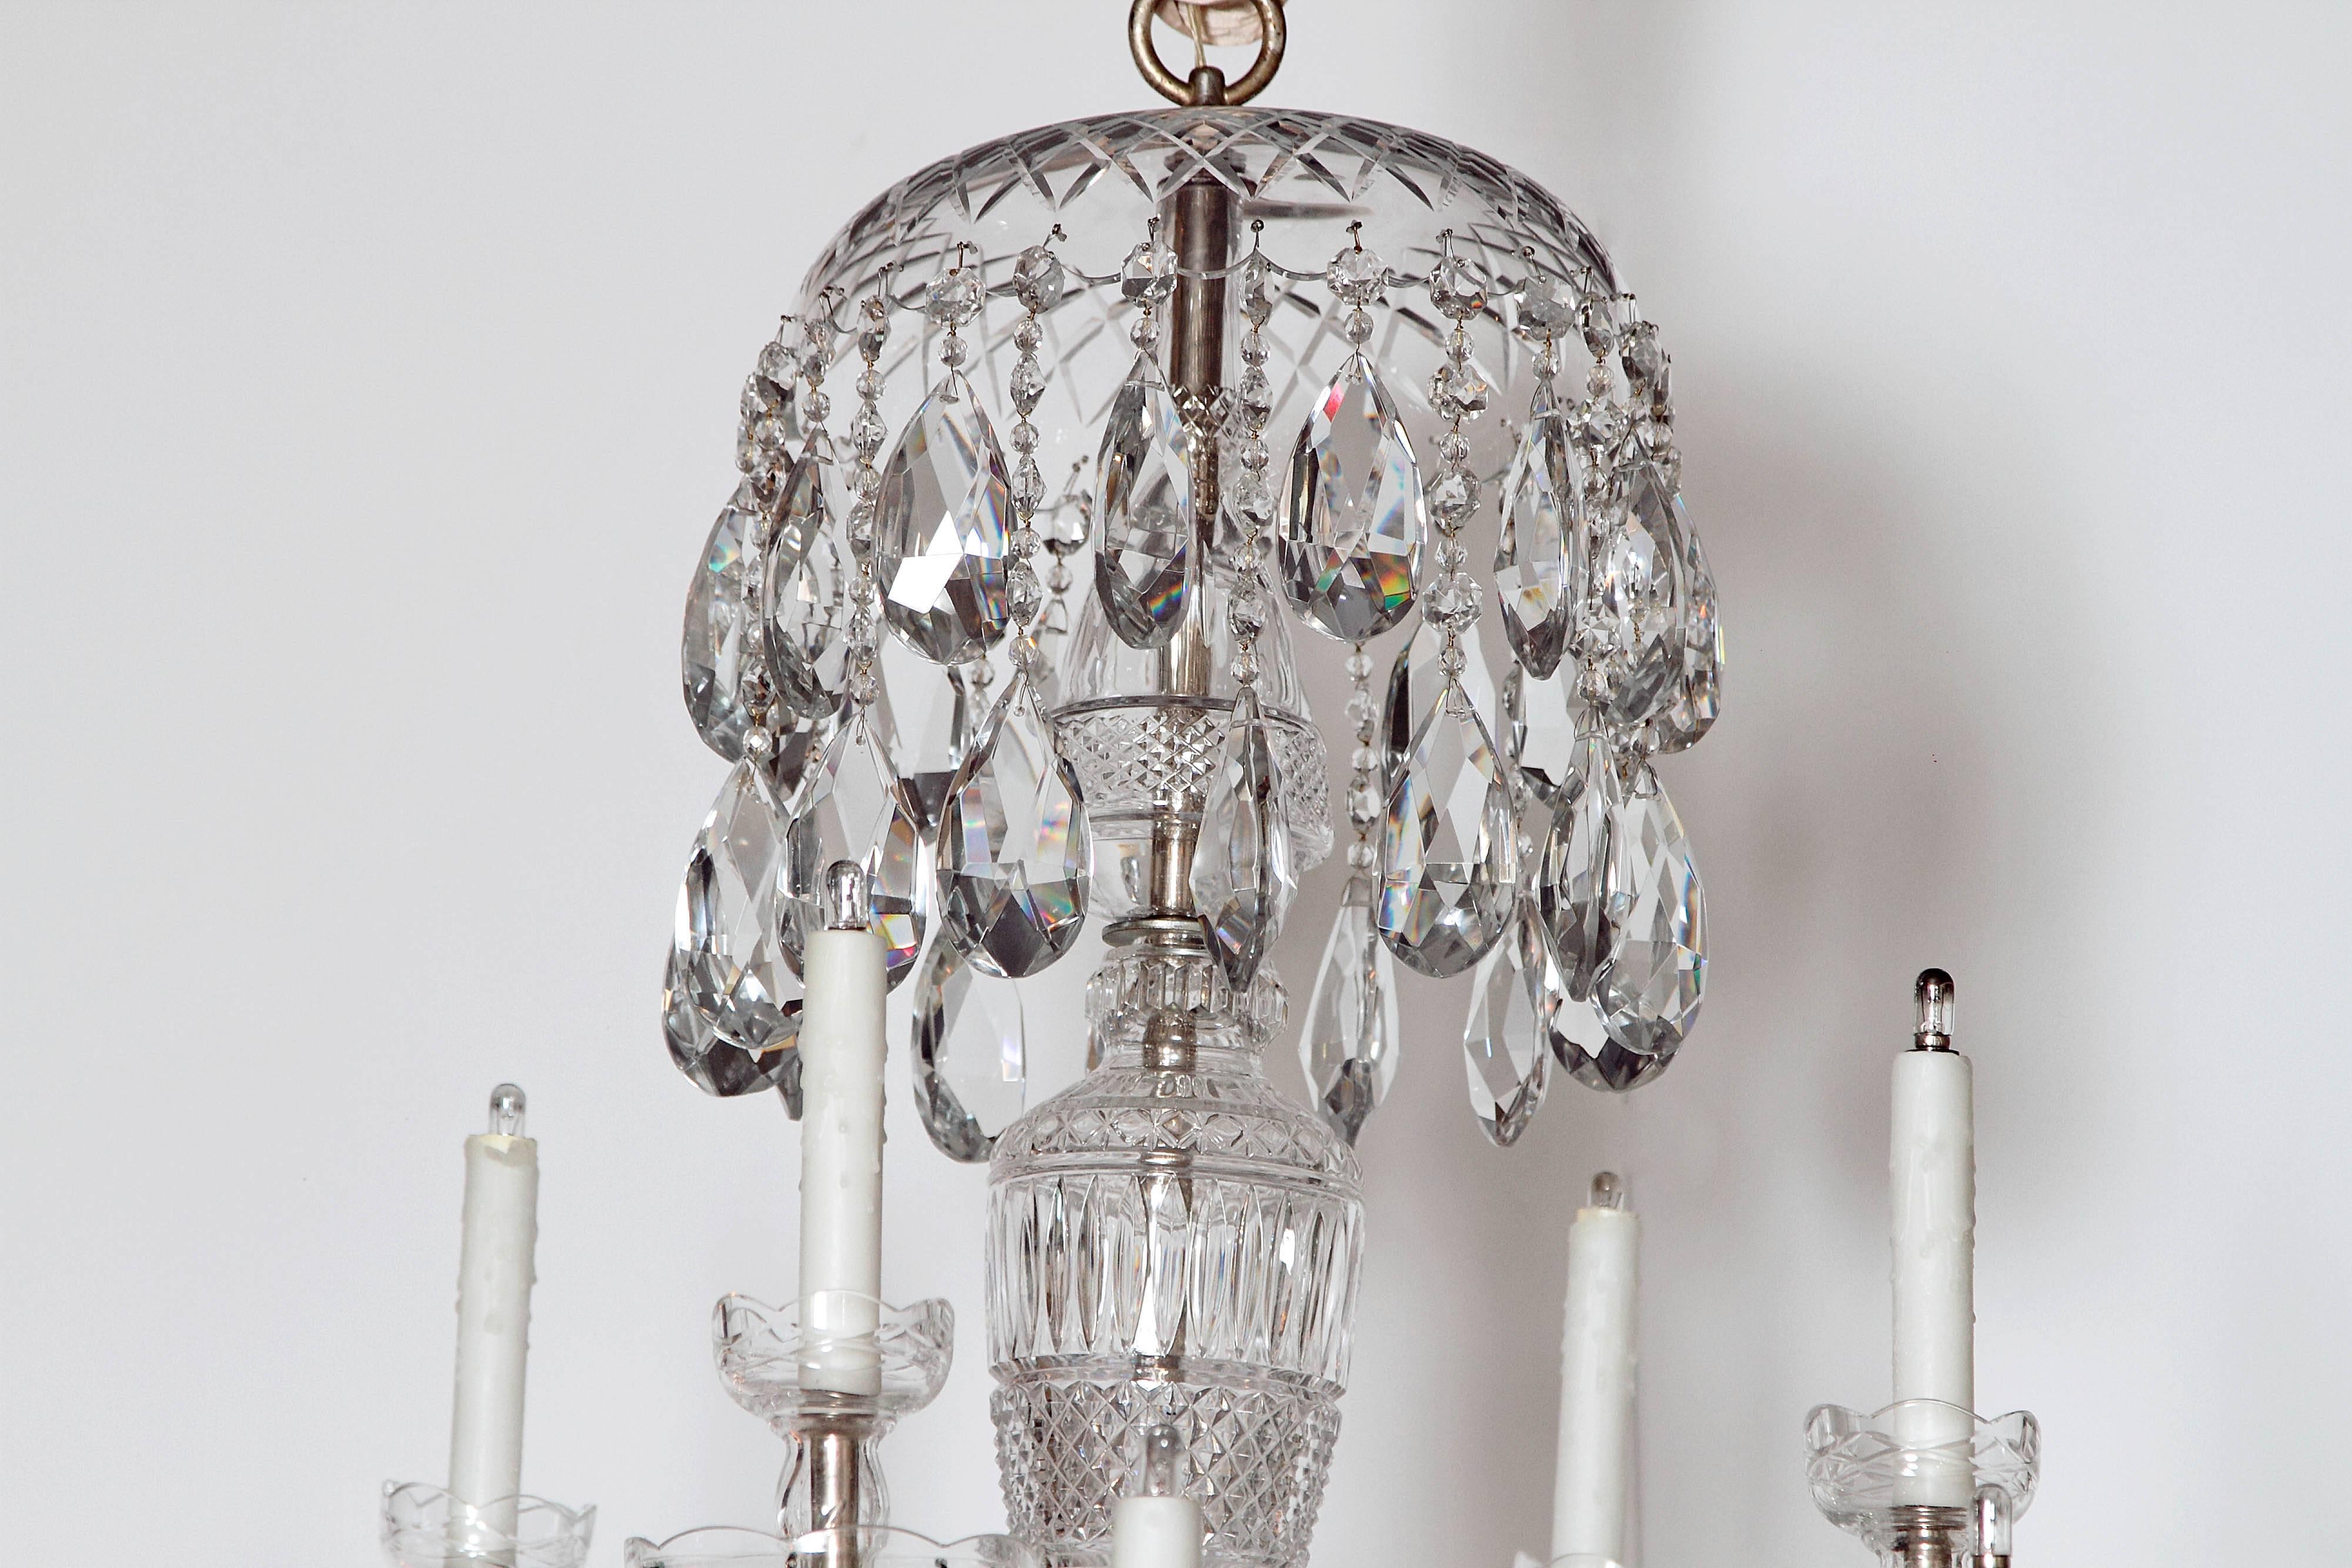 A large twelve-light Georgian style lustre / cut crystal chandelier dripping with crystals from both the top and the bottom with a central cut crystal urn form body.